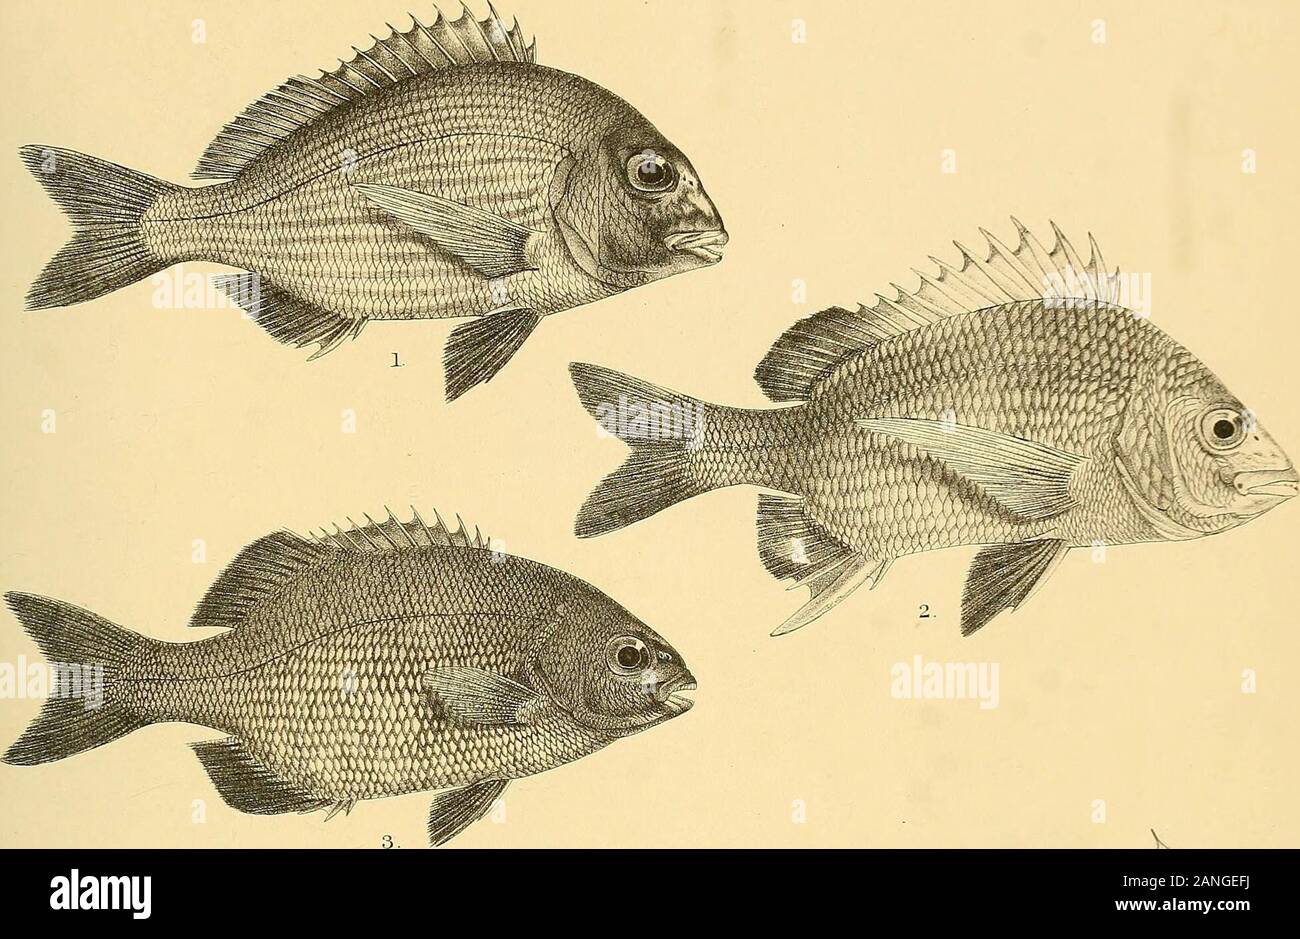 The fishes of India; being a natural history of the fishes known to inhabit the seas and fresh waters of India, Burma, and Ceylon . G.H.yord de] RBmierri Mh Broi .lira 1 CHRYSOPHRYS BATNIA. 2.C.BERDA. 3.C. CUVIER1. 4, DENTEX NUFAR. 5 CHRYSOPHRYS BIFASCIATA. 6, C. SARBA. Days Fishes of India. Plate .. Stock Photo